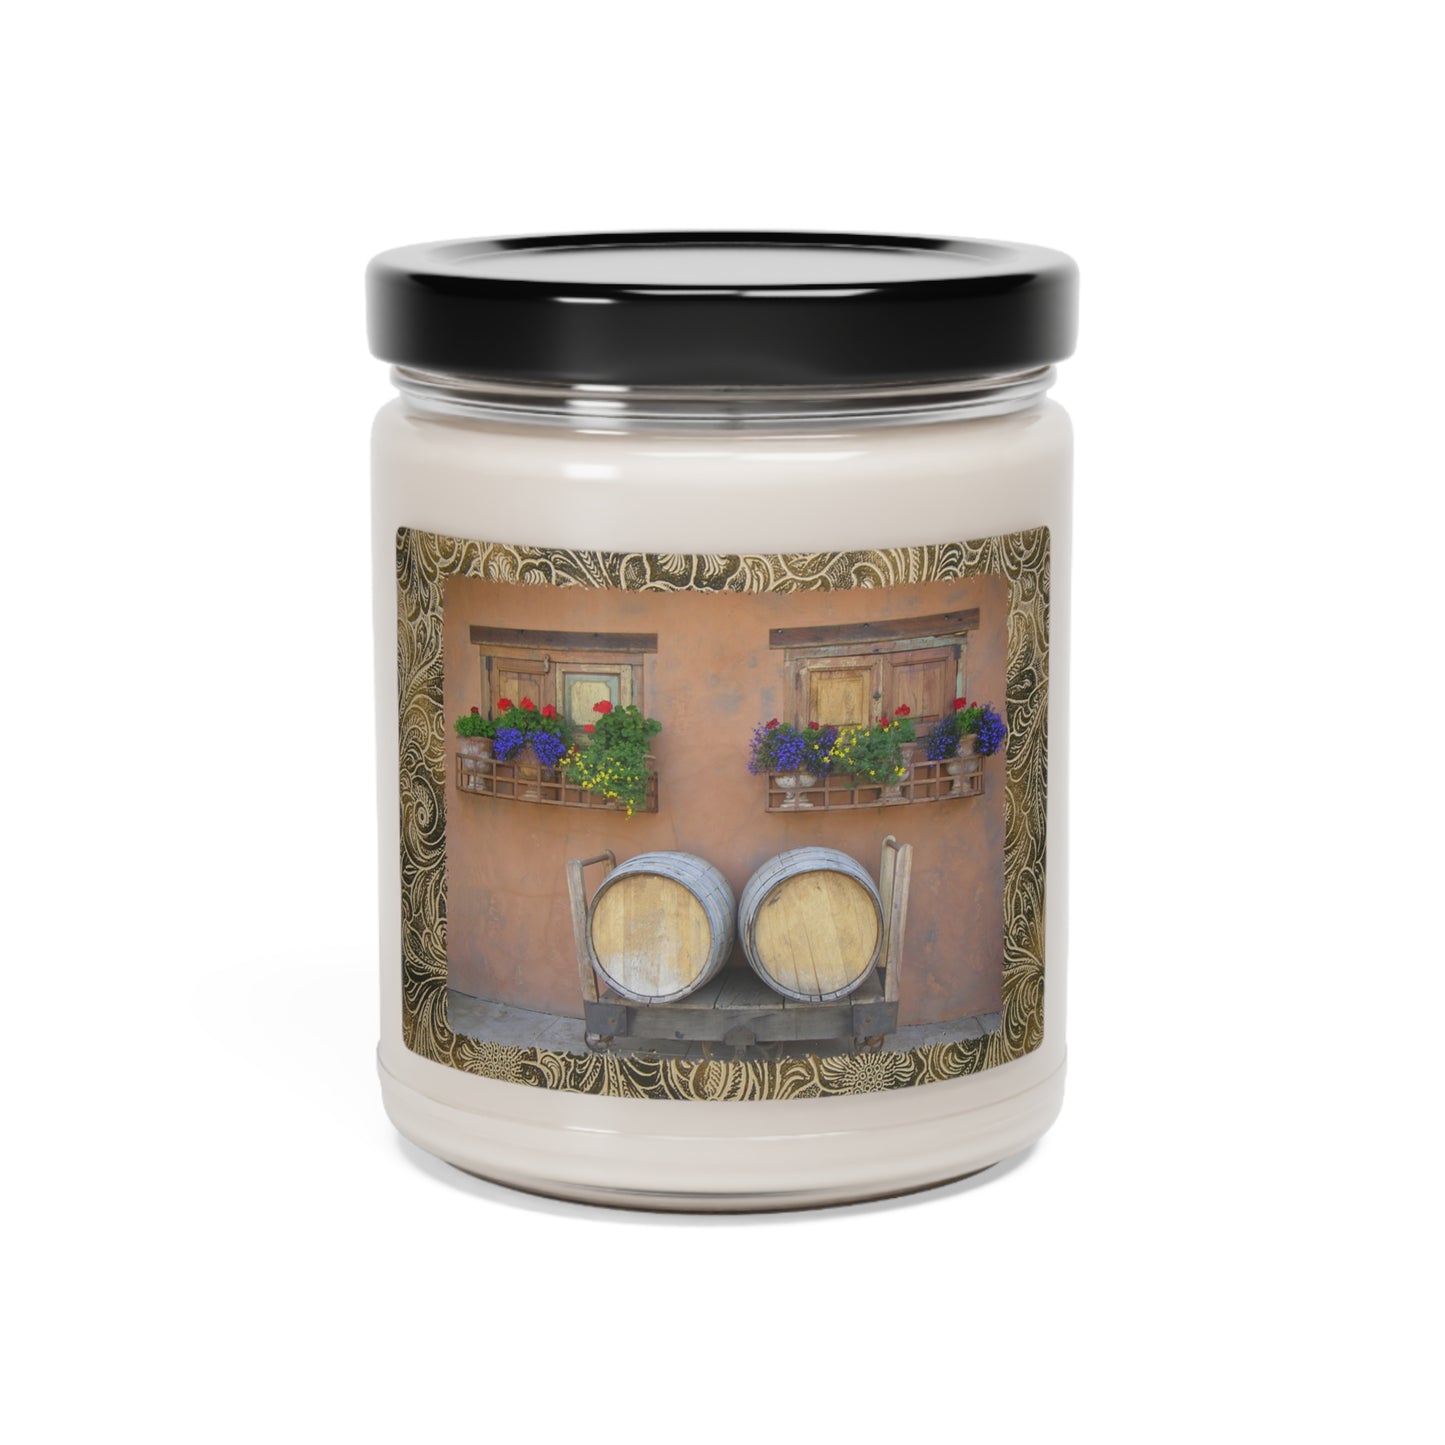 Spanish Windows & Barrels Scented Soy Candle, 9oz